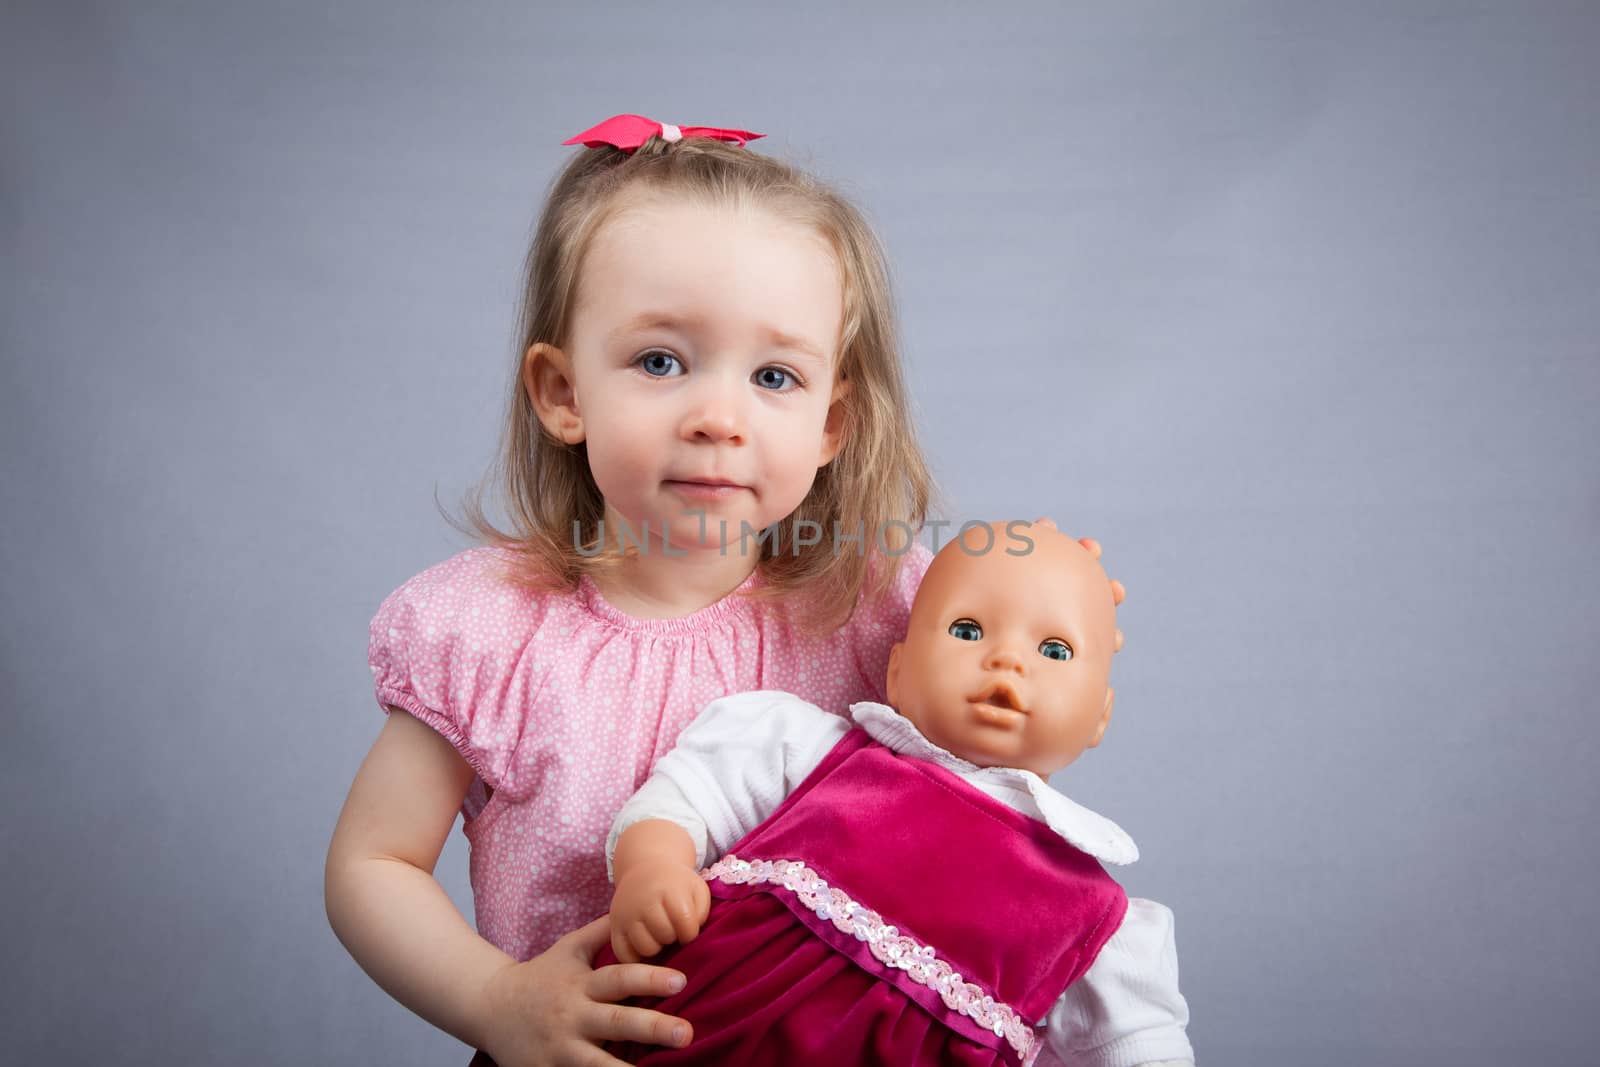 Portrait of the cute girl with a doll. Gray background.